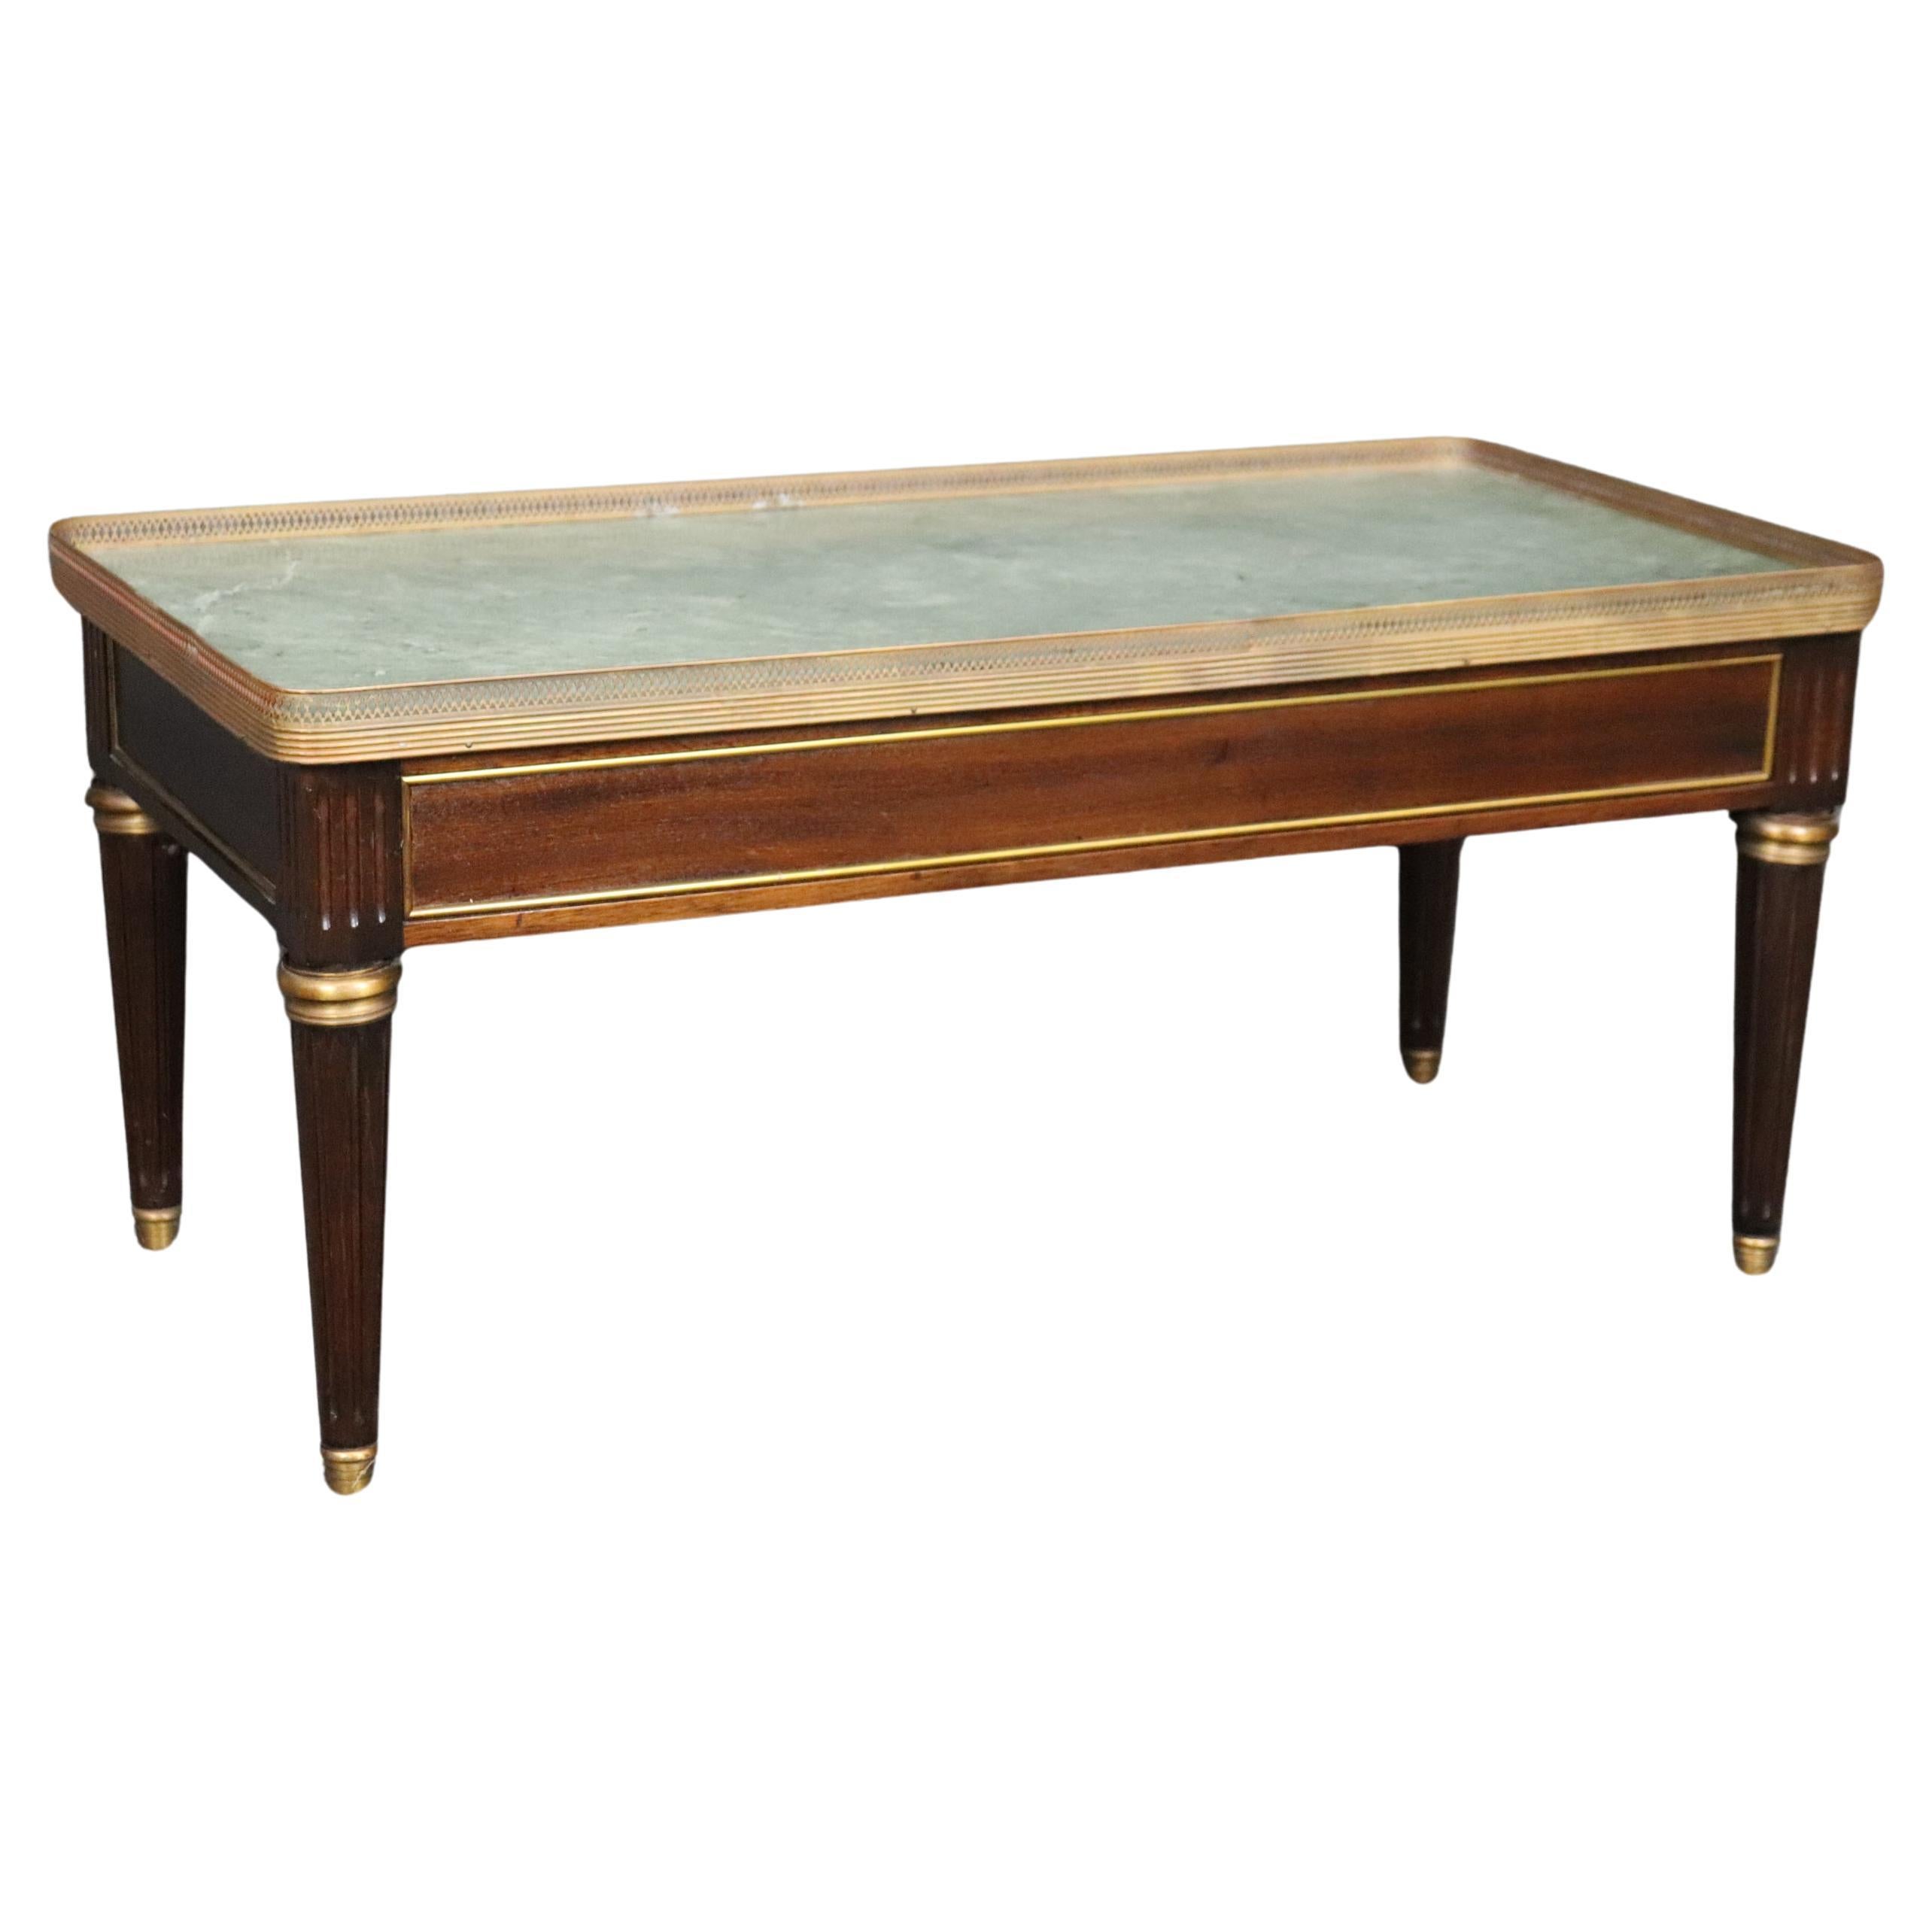 Louis XVI Style Marble Top Coffee Table Attributed to Maison Jansen